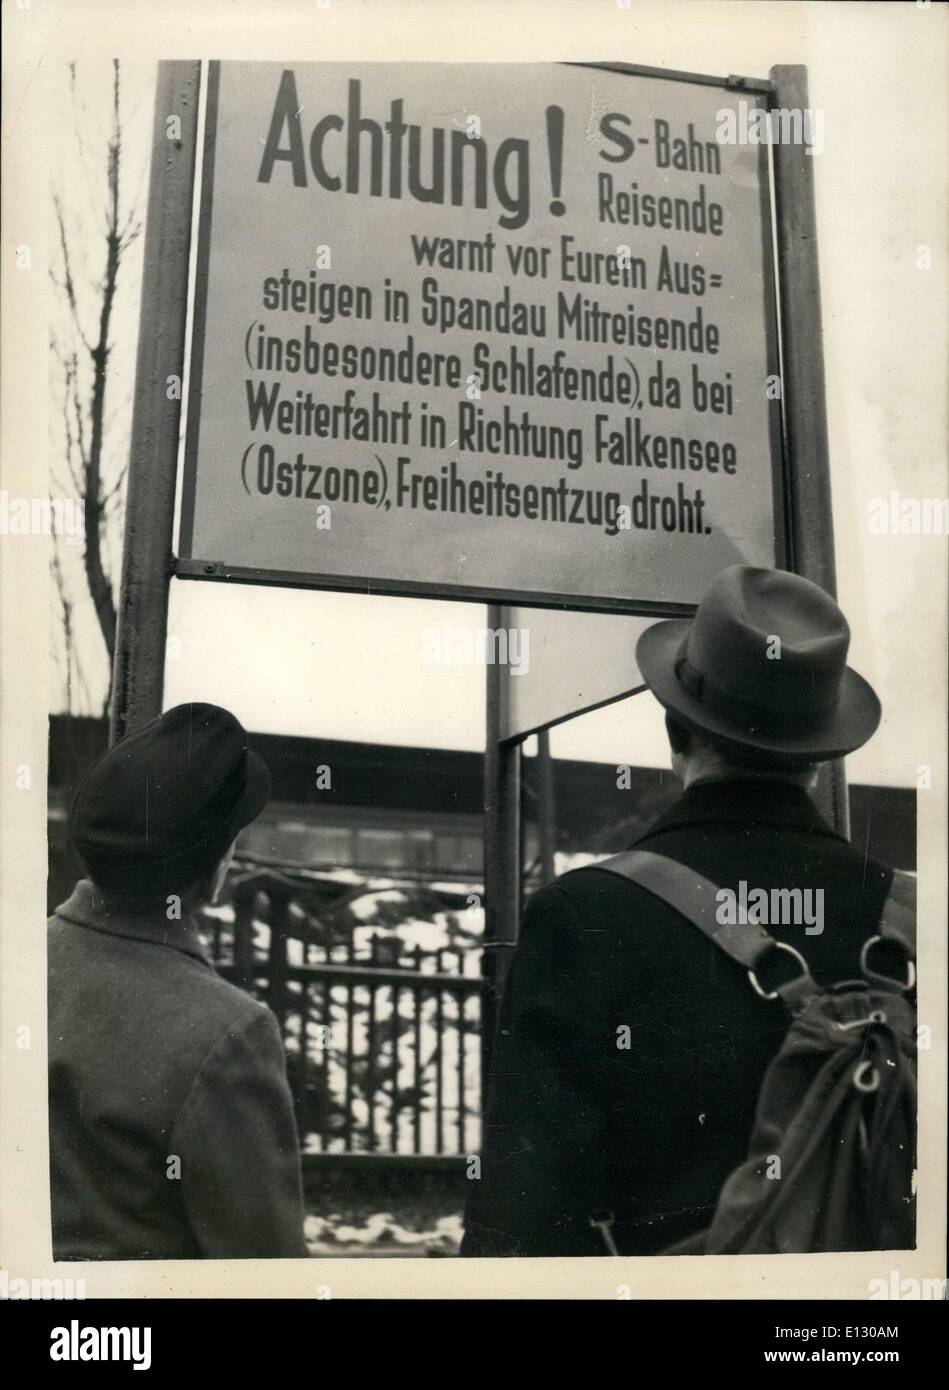 Feb. 25, 2012 - New warning notices for travellers in Berlin. The next station is in the Soviet zone. New warning notices have seen erected at Spandau West, the last electric railway station before the trains enter the Russian Zone. The notice warns travellers that if they rode on to the next station Falkensee they would be in the Russian zone and advising them to waken any travellers who were asleep as failure to do so might lose them their freedom. Keystone Photo Shows: Travellers reading the new warning before taking the electric trains at Spandau West, Berlin. Stock Photo